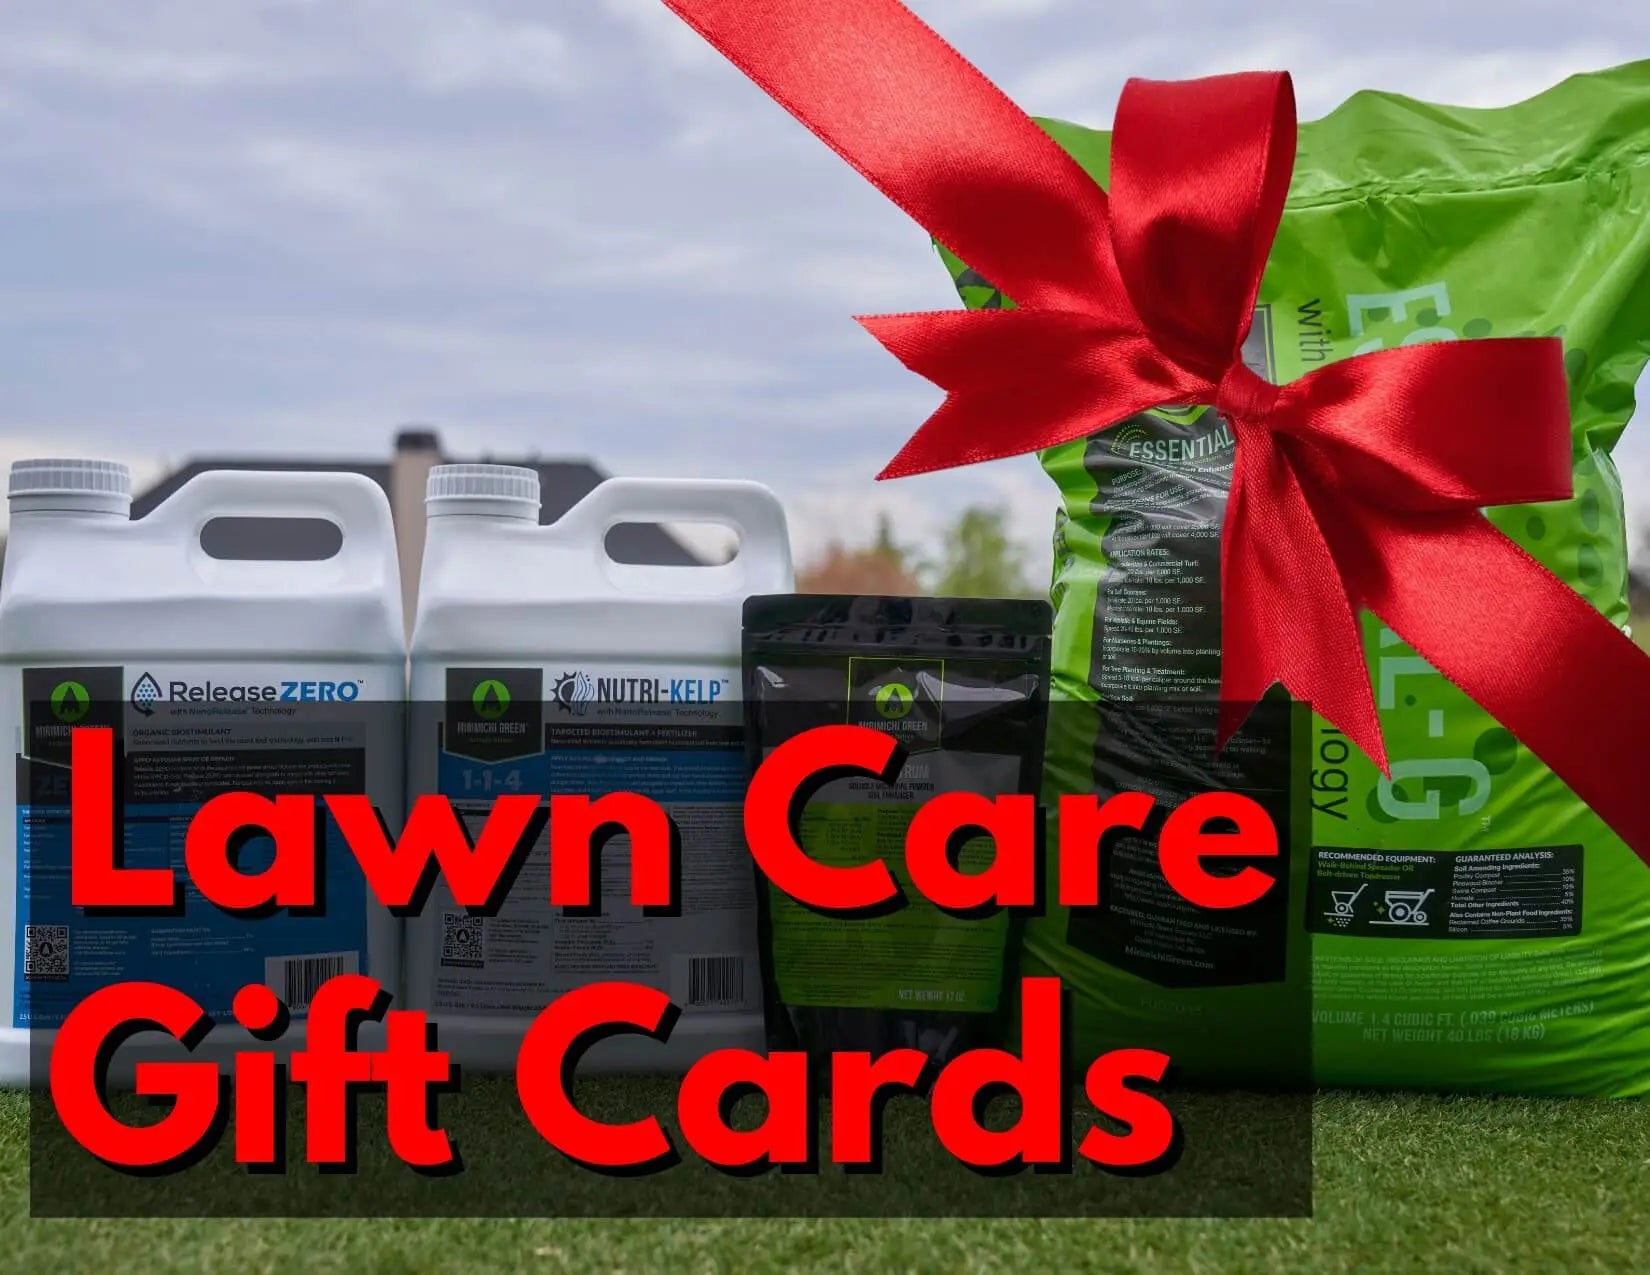 Lawn care gift cards